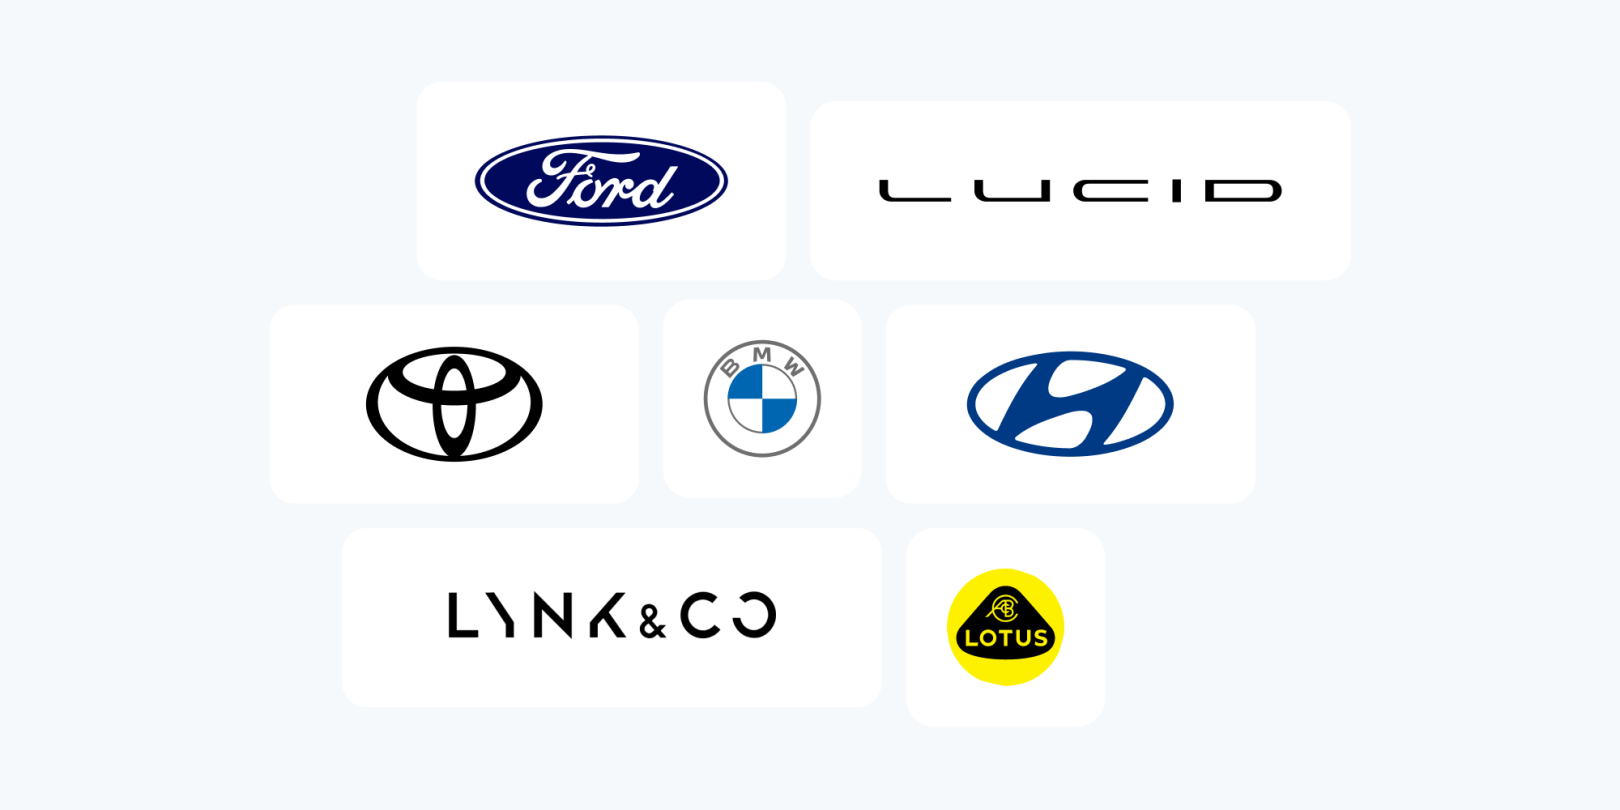 Blog > The disruption the auto industry has been waiting for > Header image